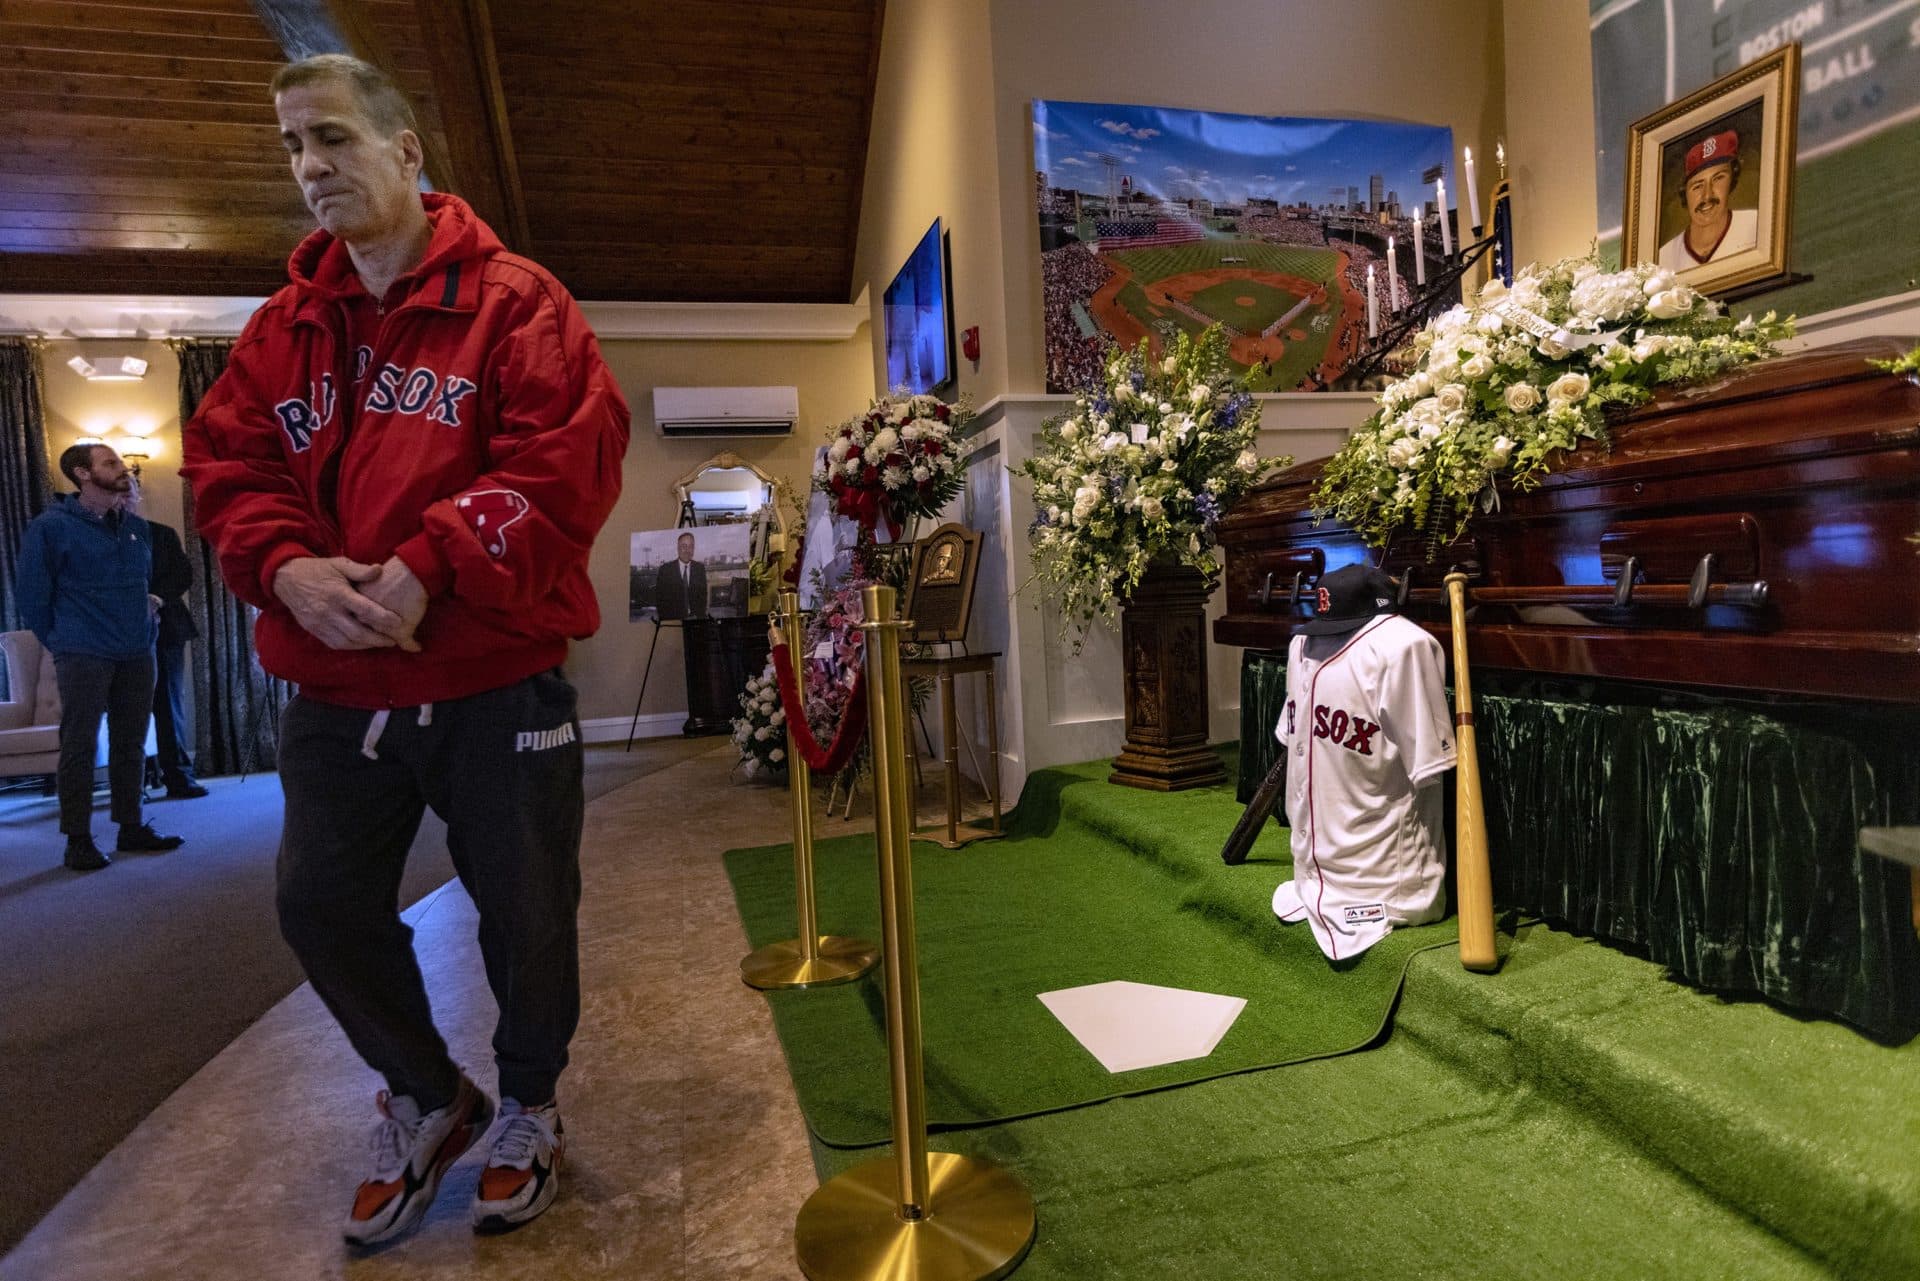 Brett Juliano of Watertown walks away after paying his respects to Red Sox great Jerry Remy during the memorial at the Mary Catherine Chapel of Brasco &amp; Sons Memorial in Waltham. (Jesse Costa/WBUR)